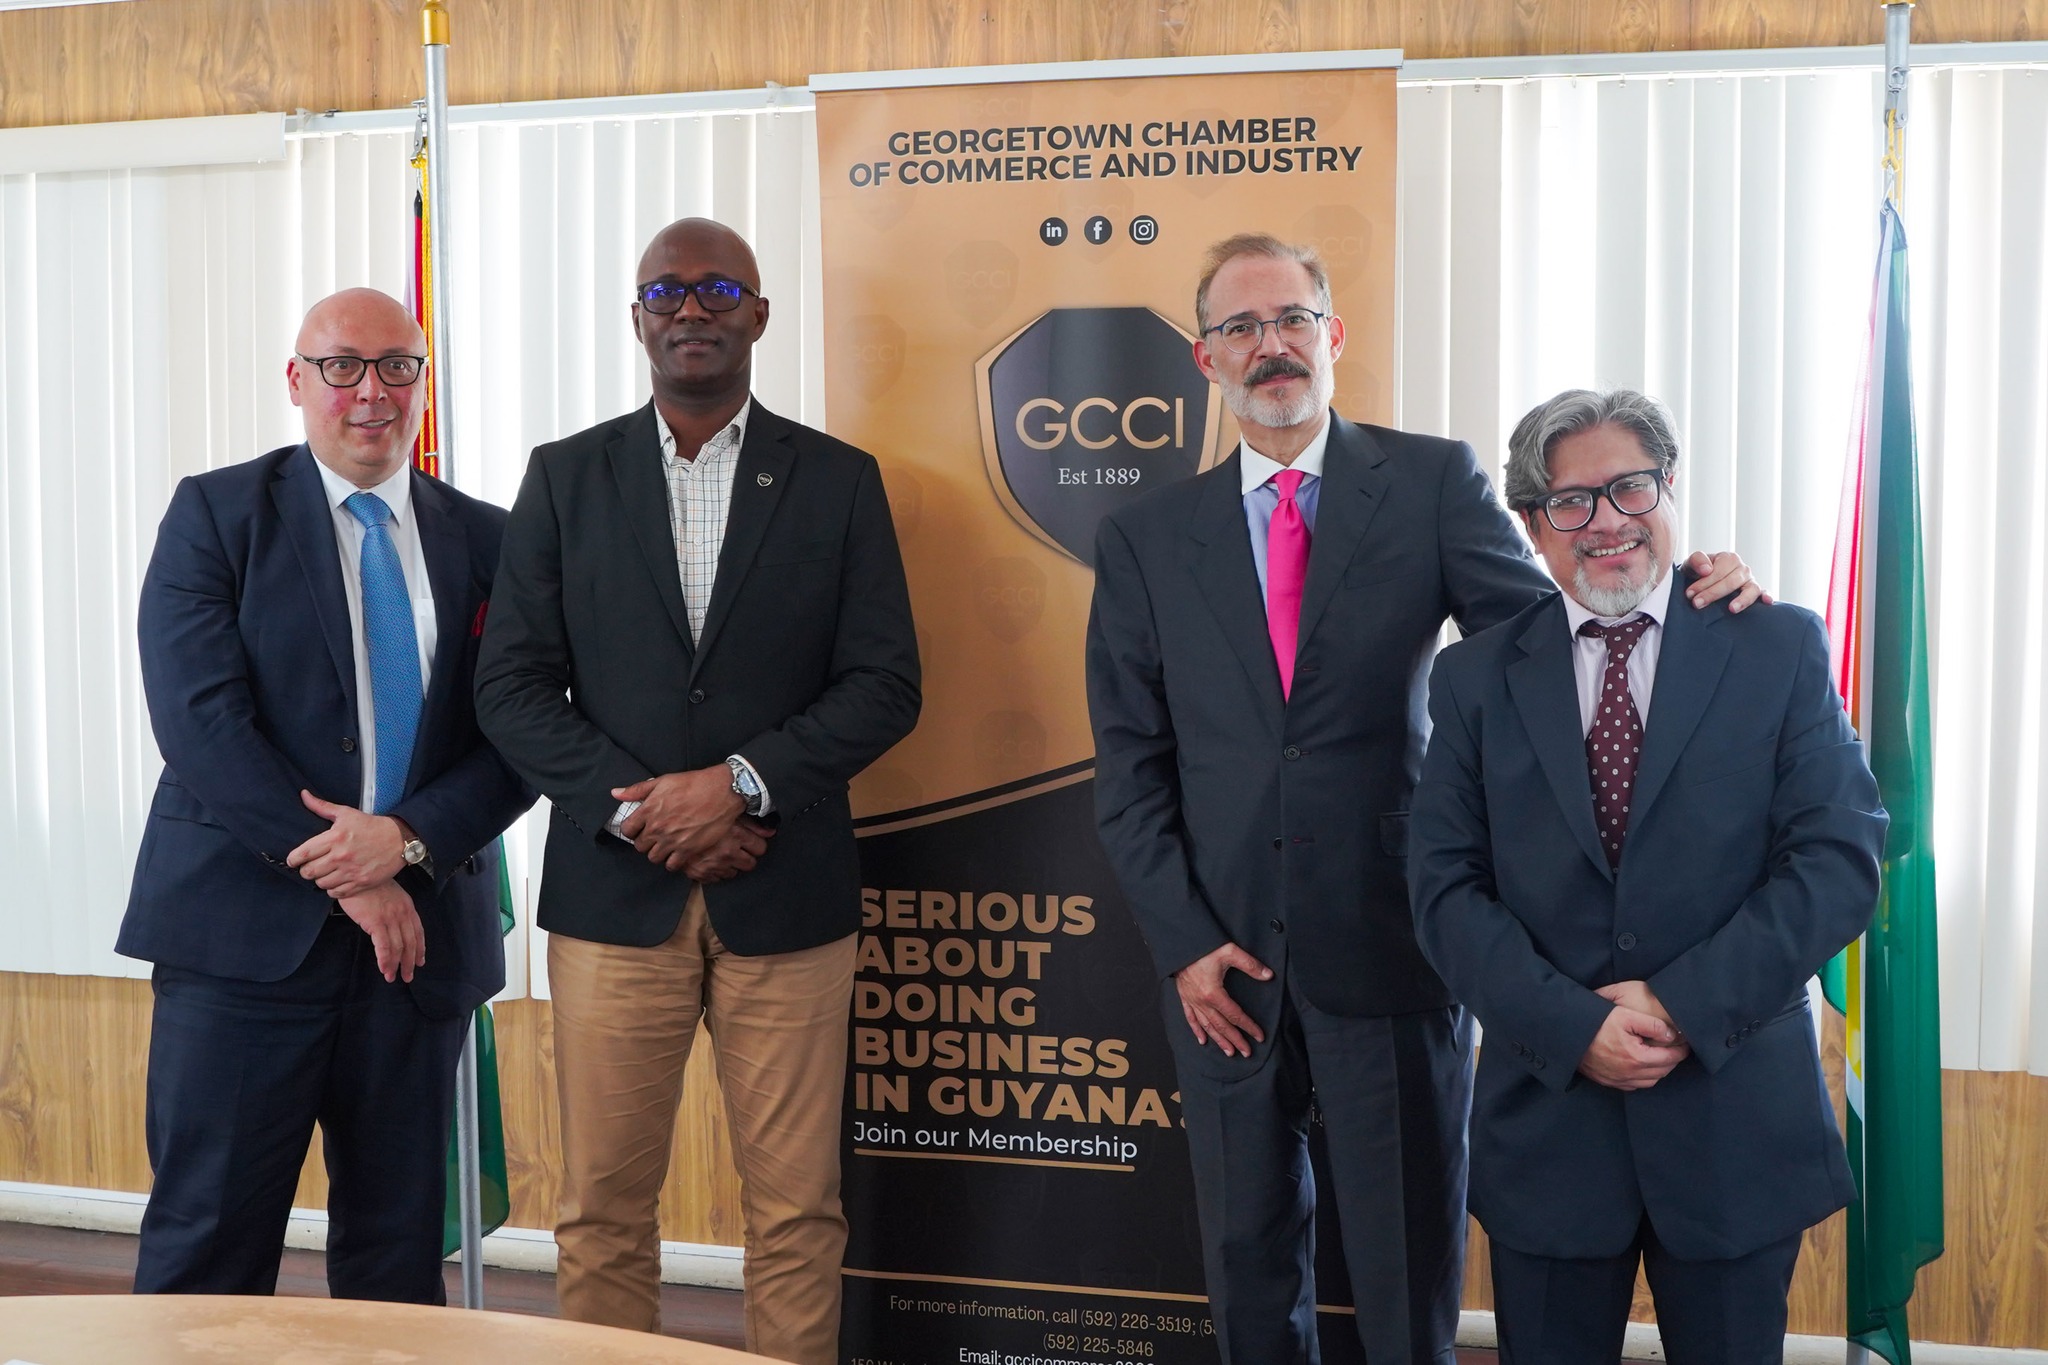 GCCI met with Zulu Investments